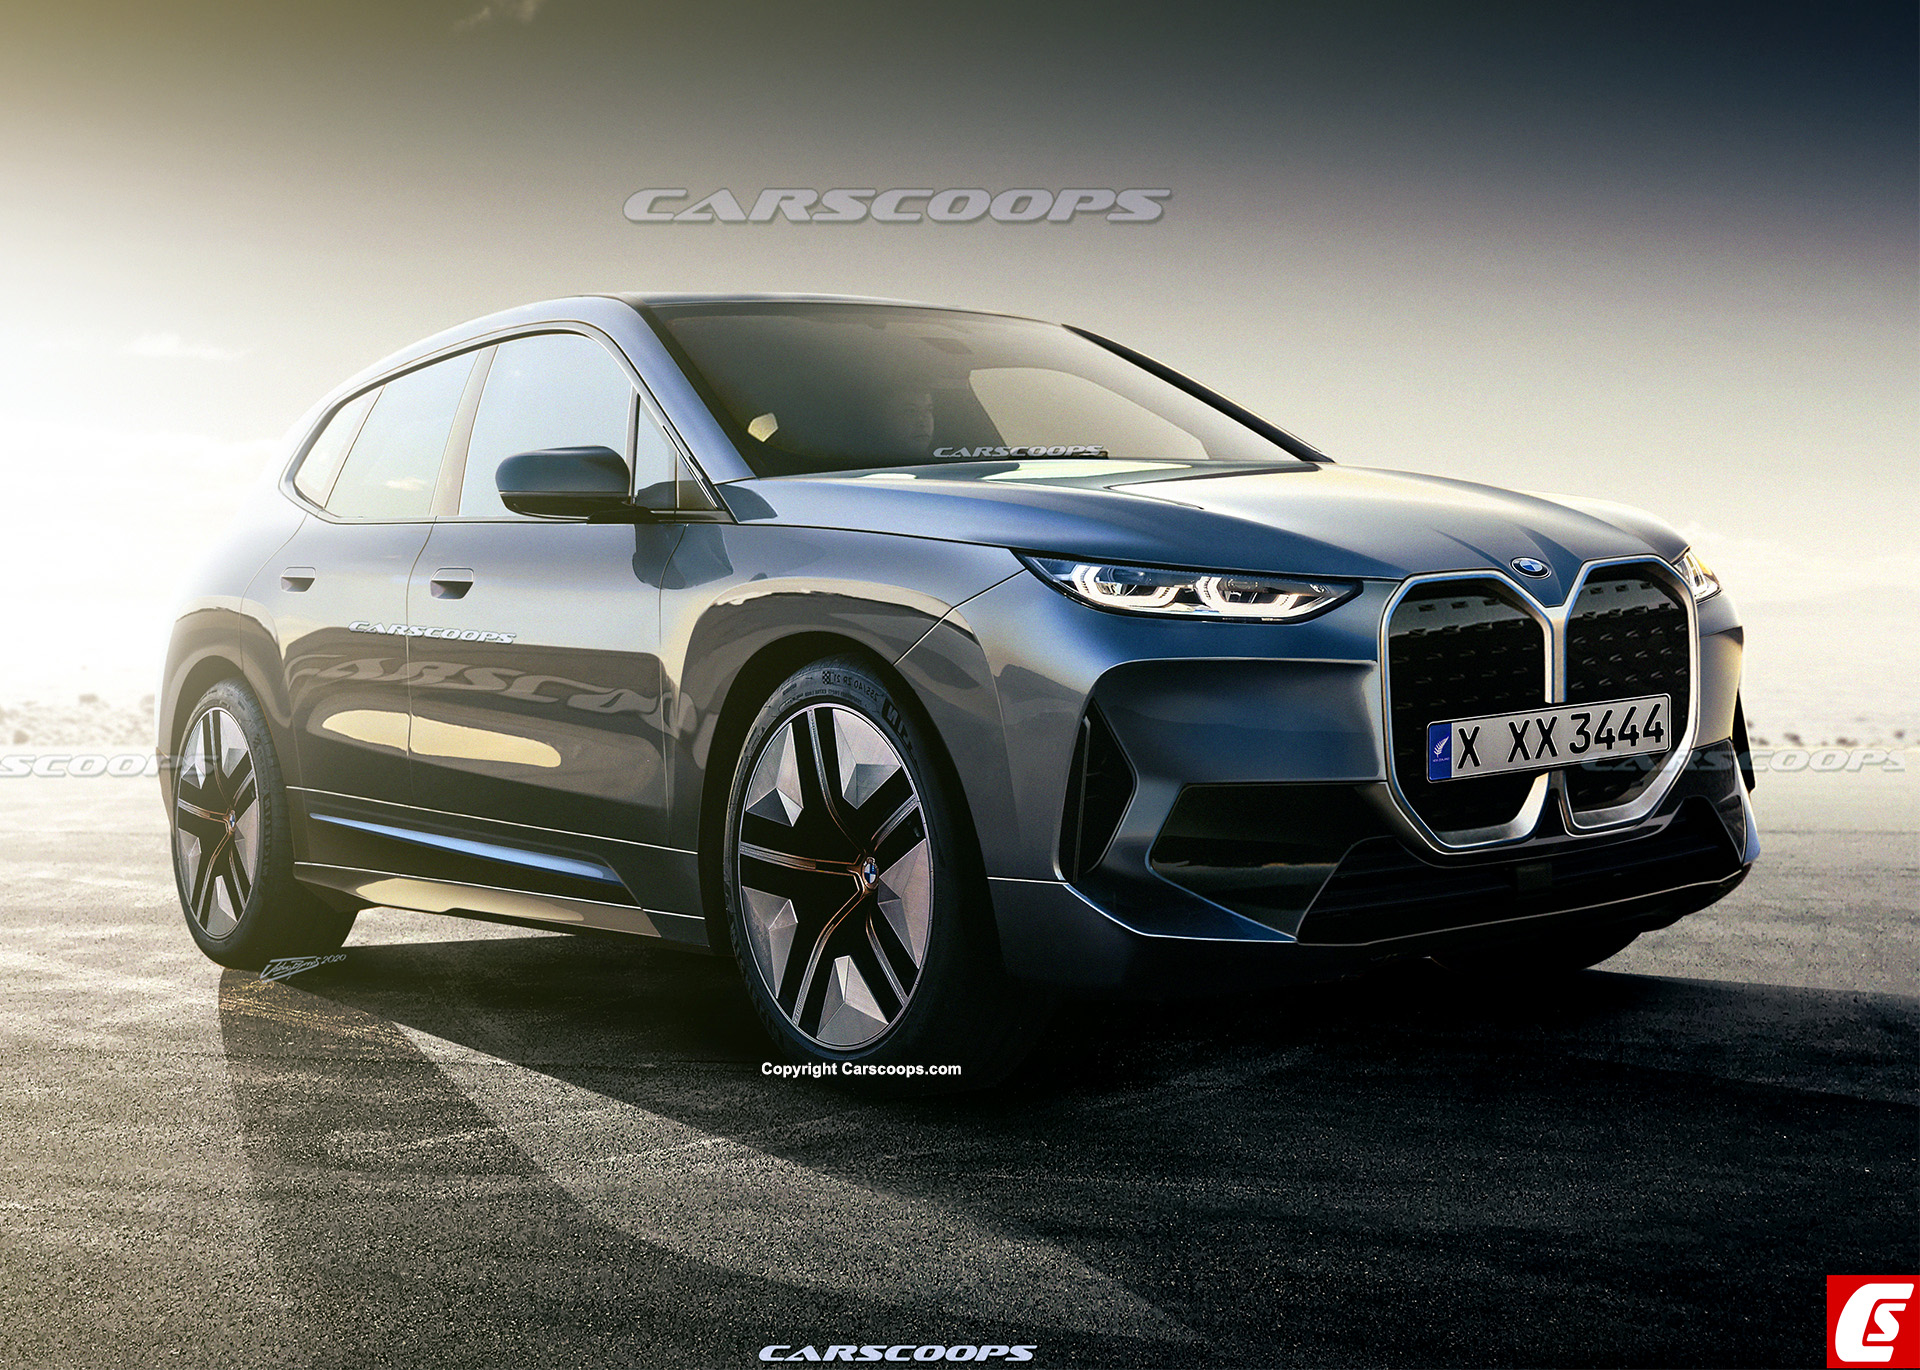 2021-BMW-iNext-SUV-Carscoops.jpg